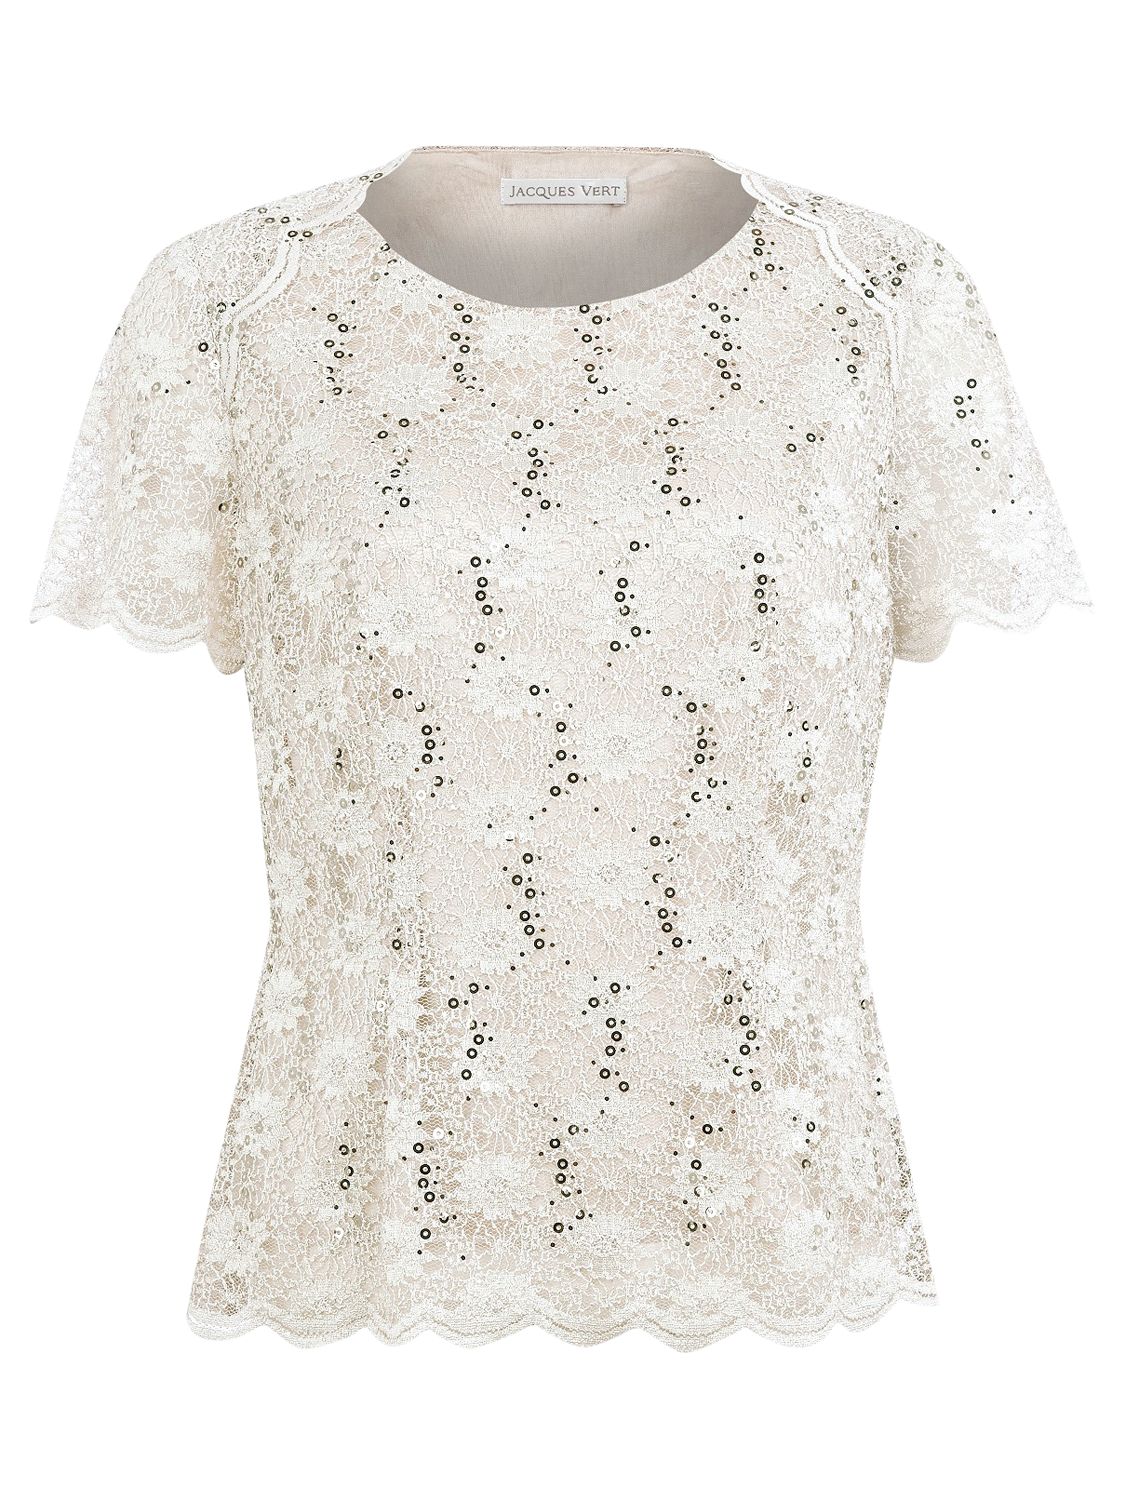 Buy Jacques Vert Sequined Lace Top, Light Pink Online at johnlewis.com